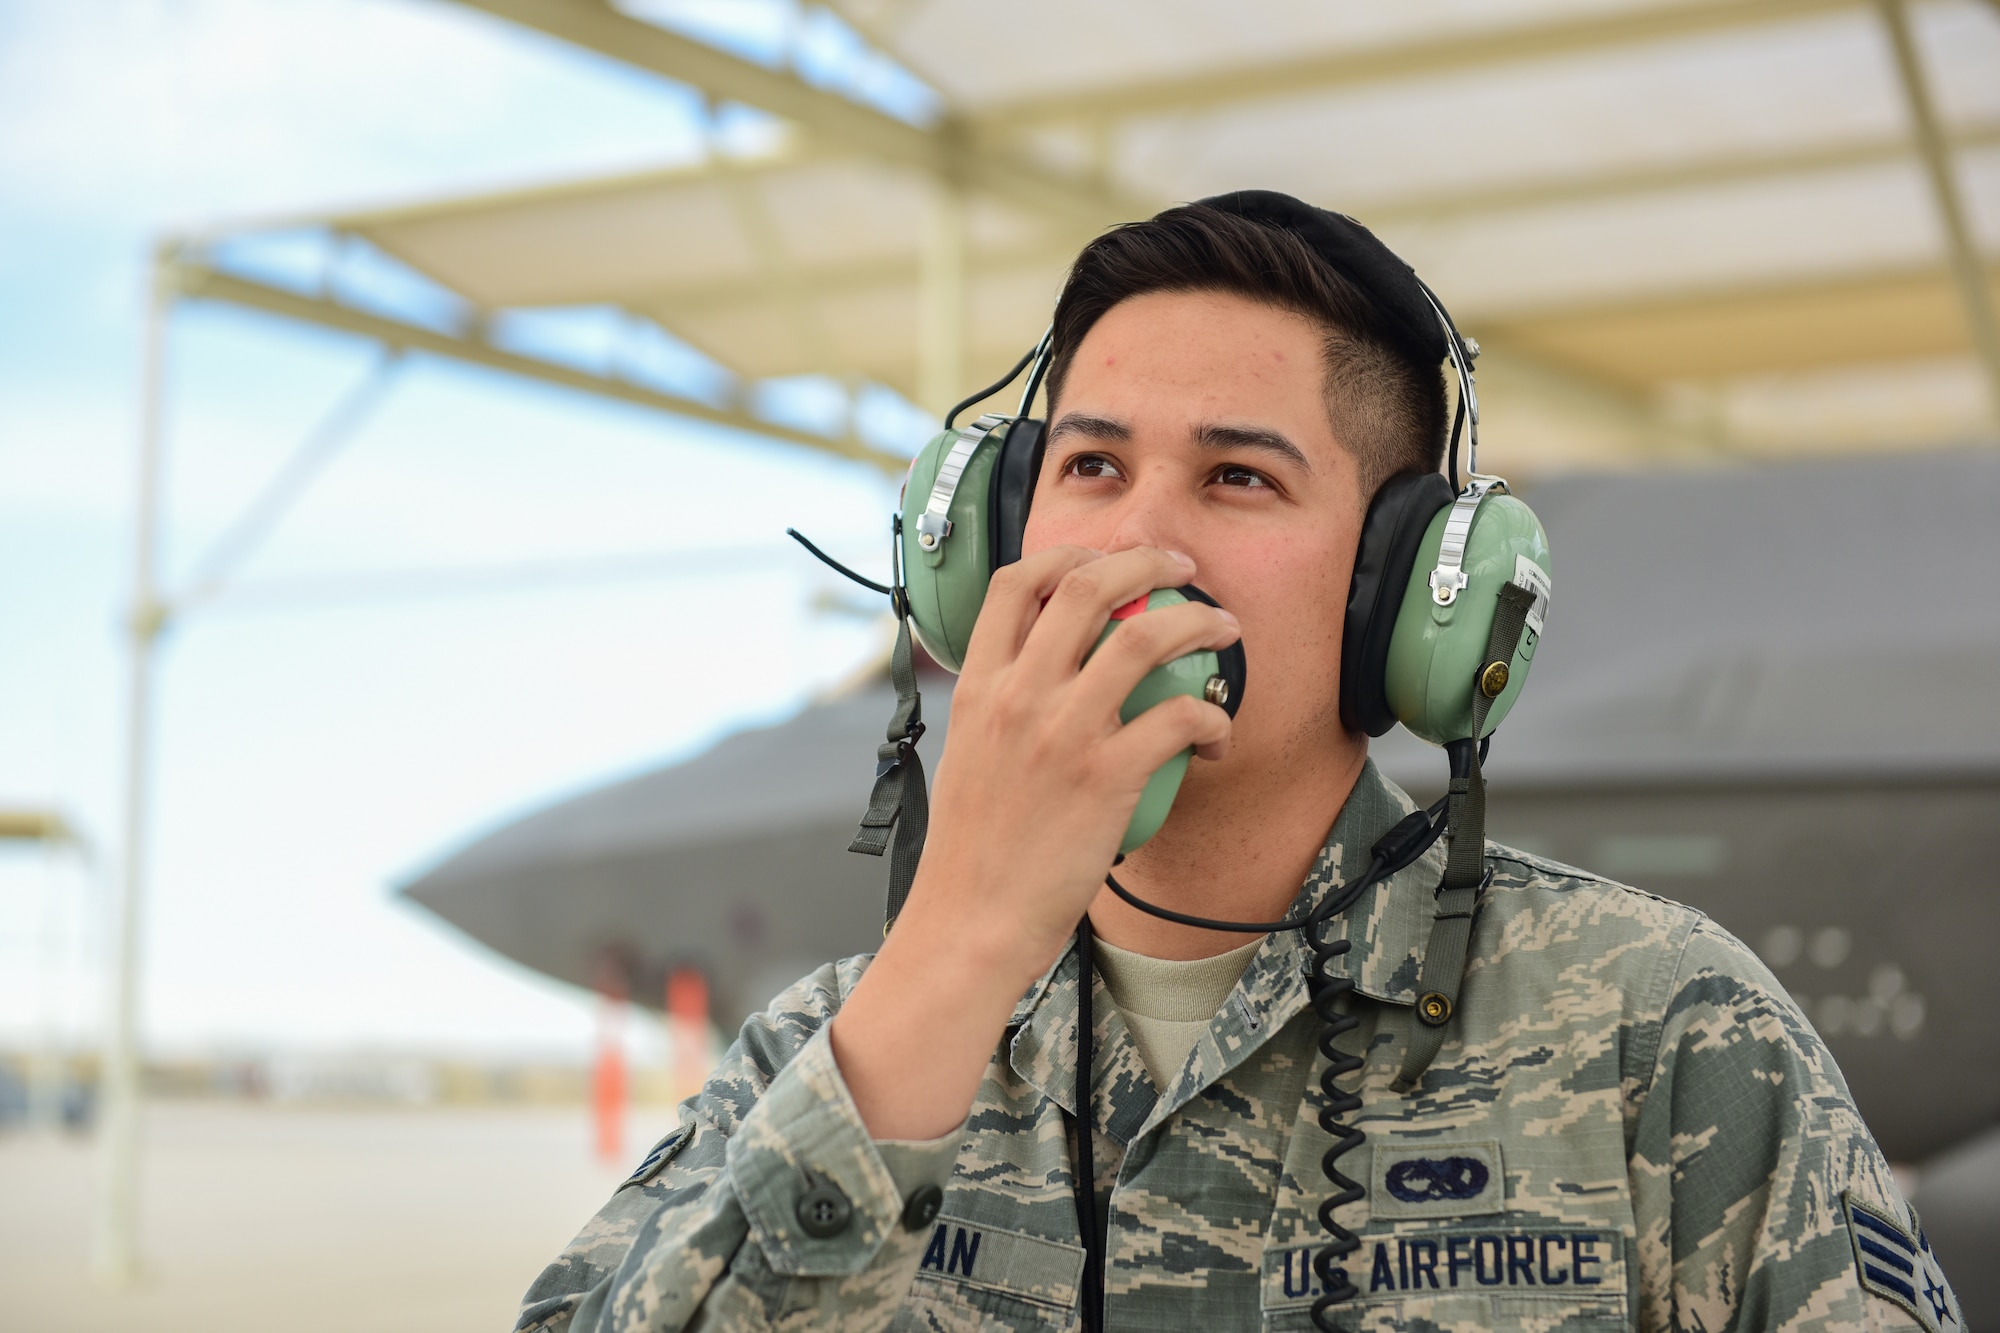 The Warrior of the Month program is a way to recognize and spotlight the Airmen of the 944th Fighter Wing for their positive impact and commitment to the mission.